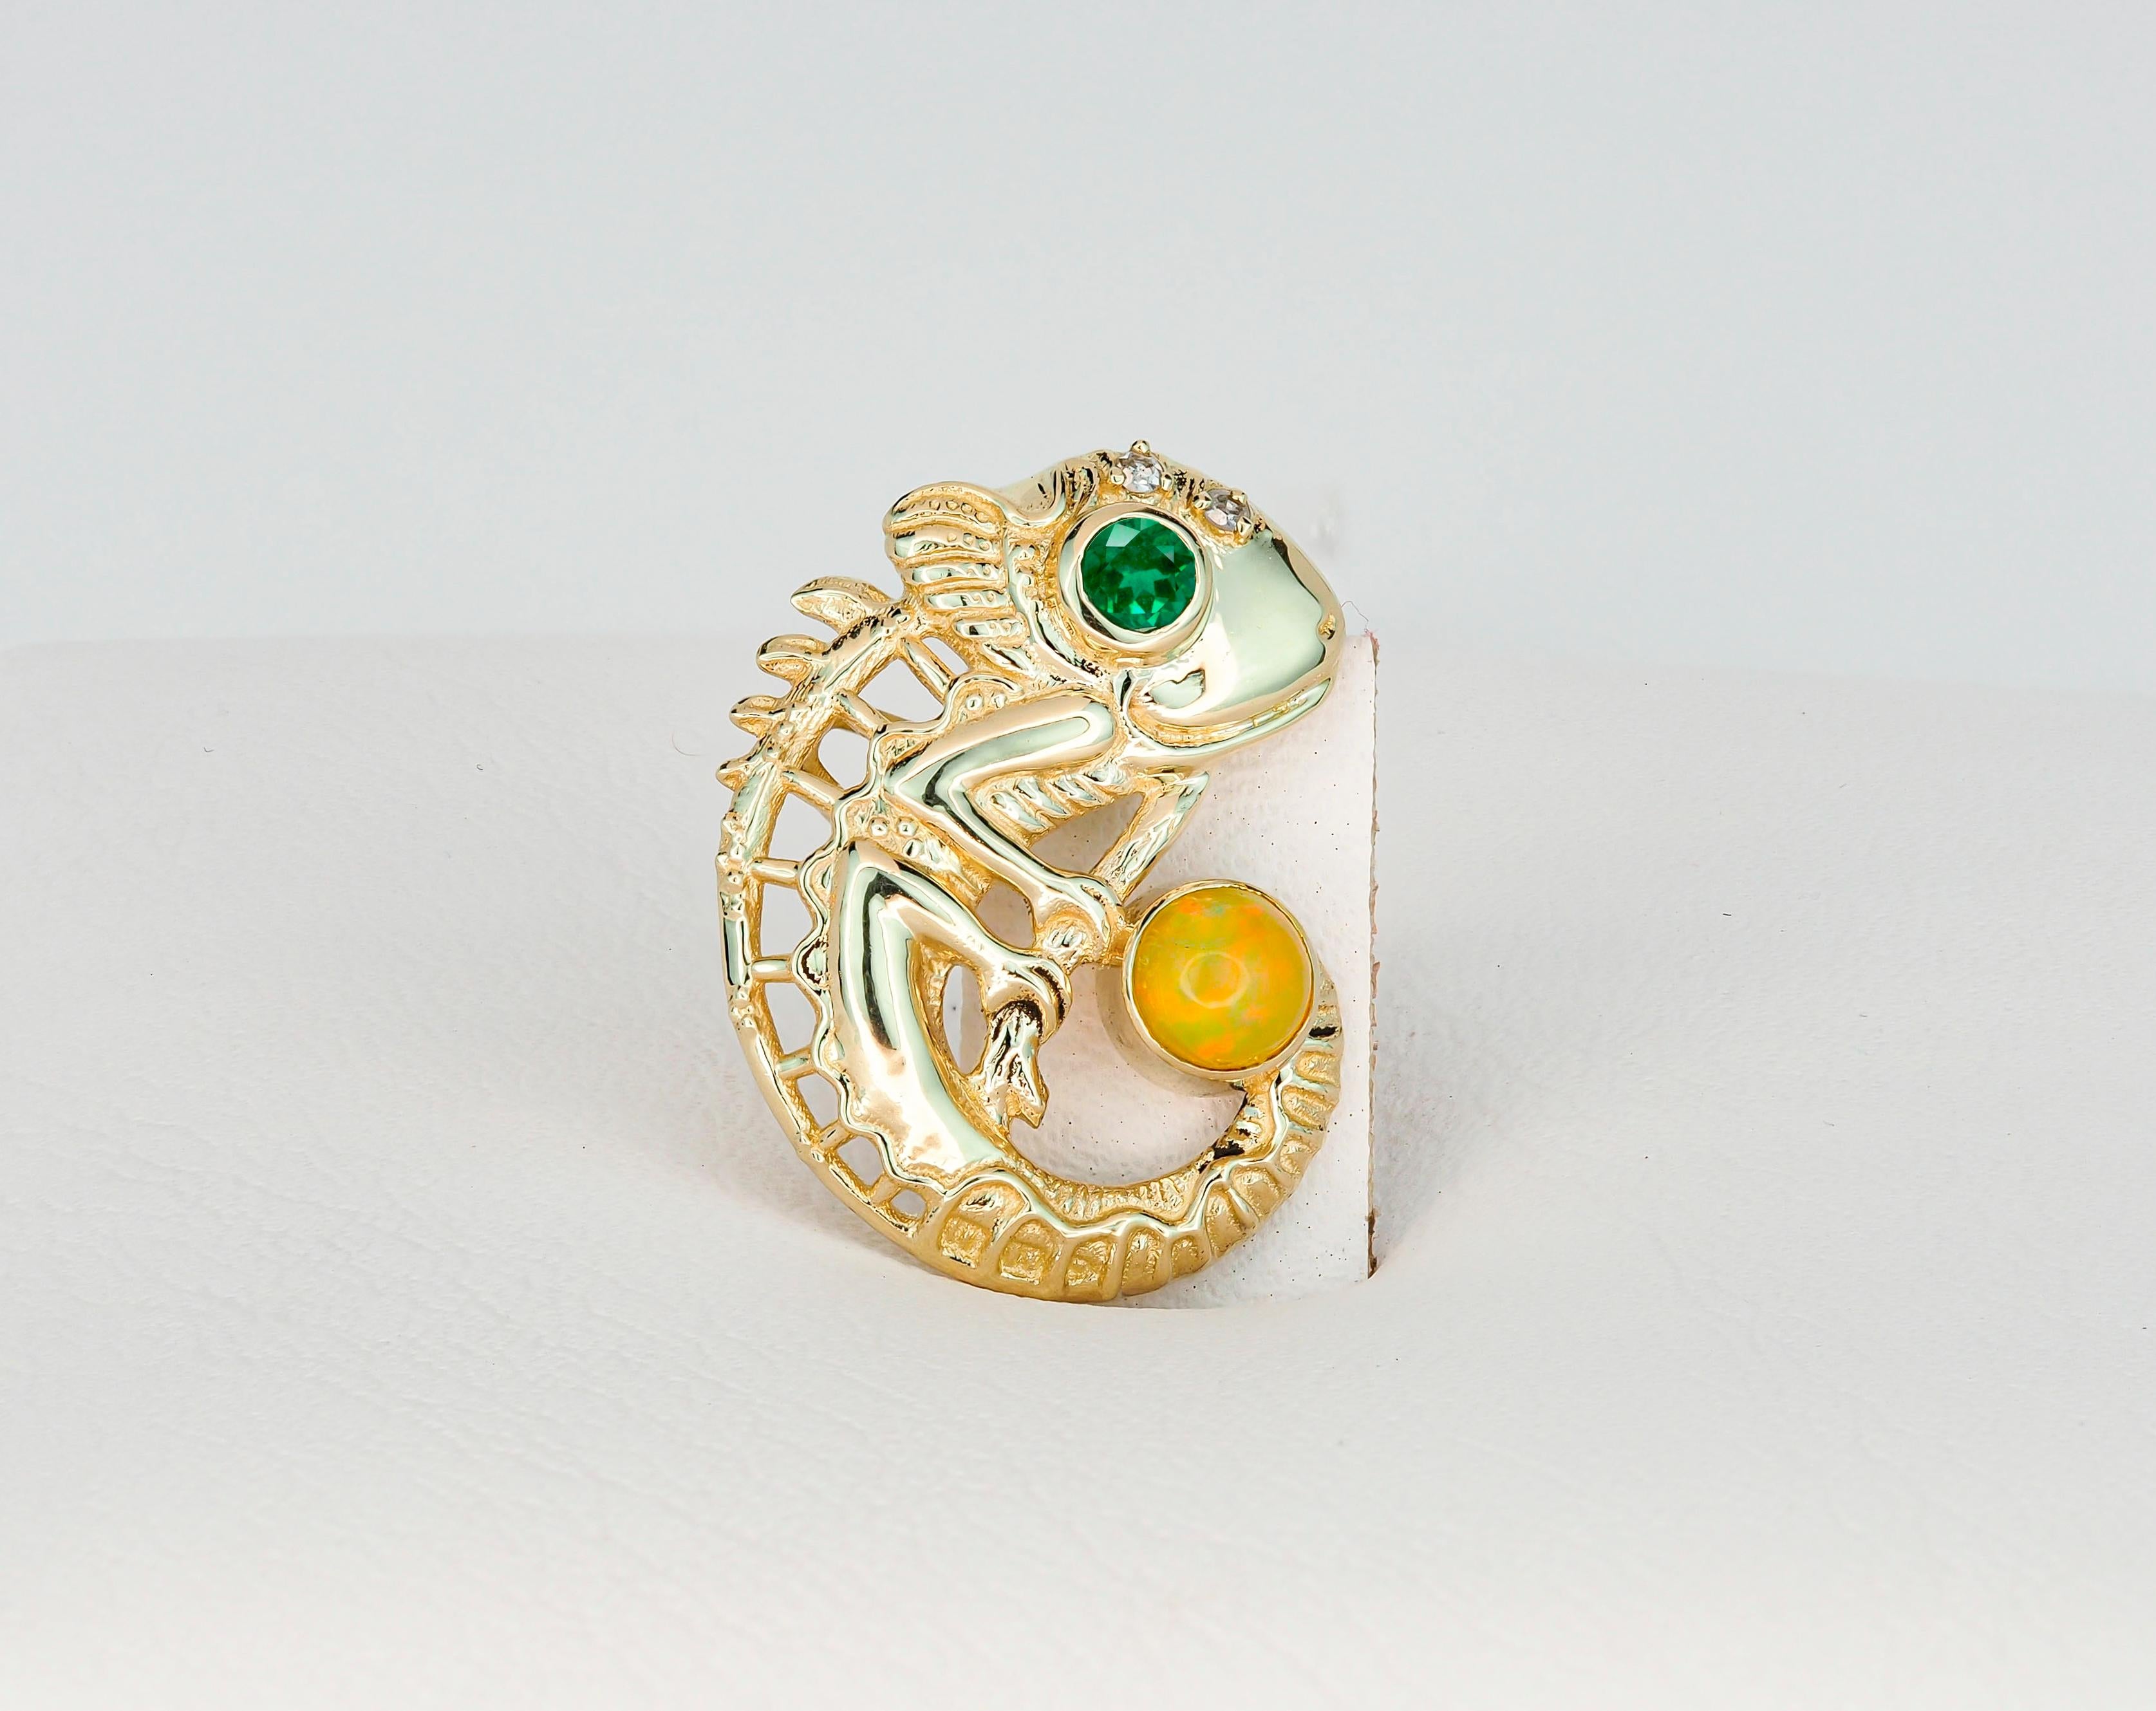 Cabochon Chameleon pendant with opal, emerald and diamonds in 14k Gold.  For Sale